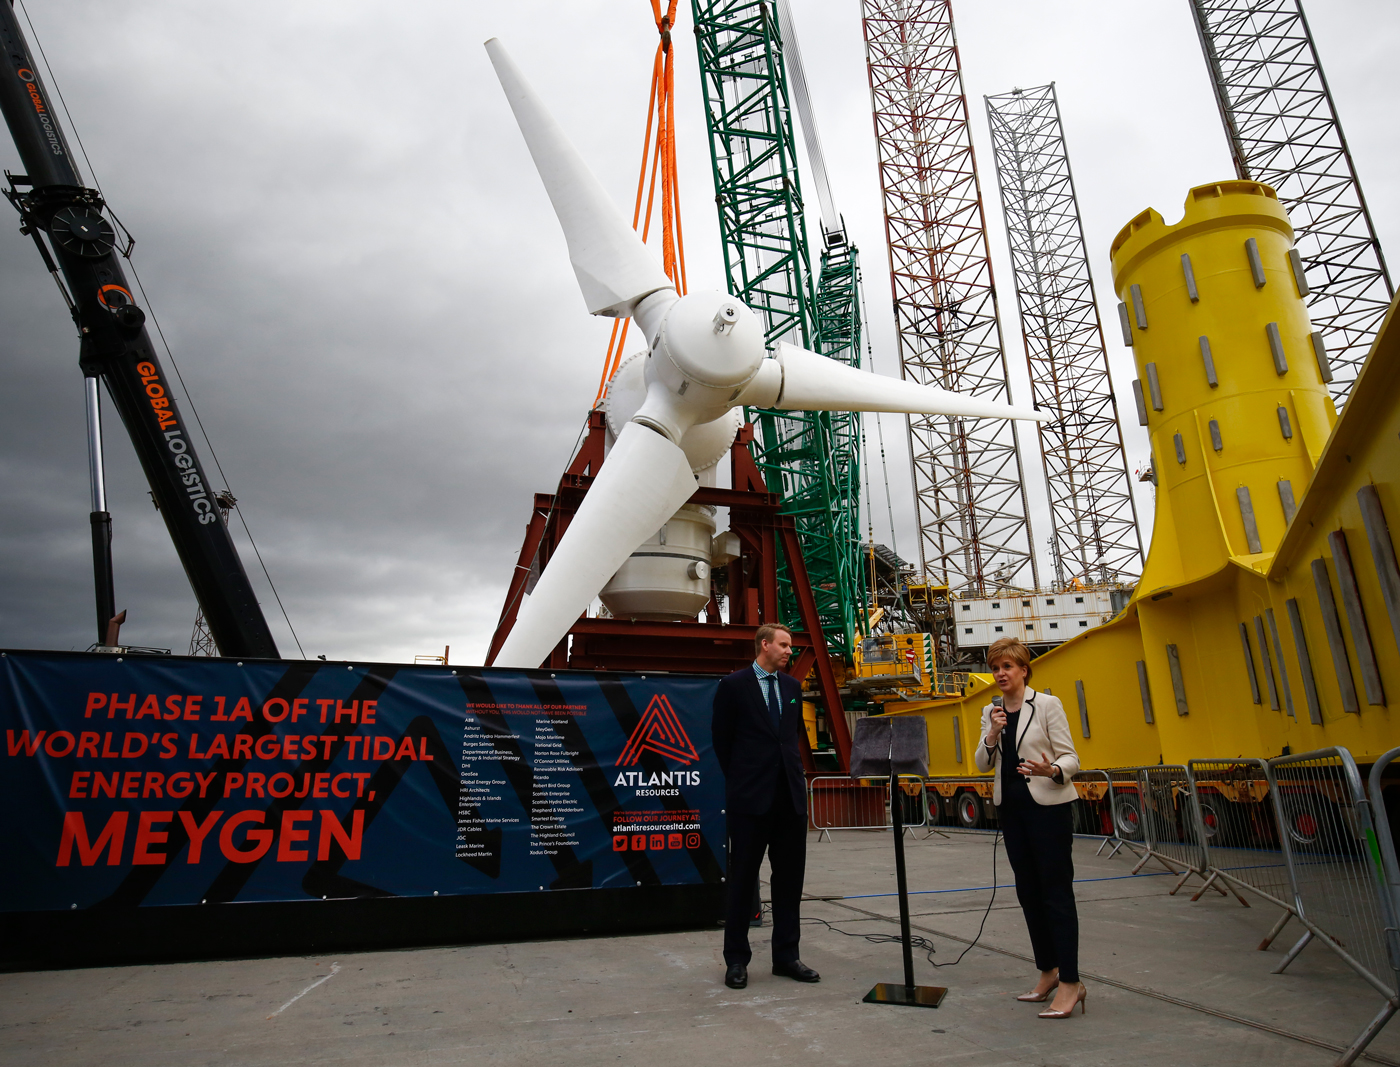 Scotland's First Minister Nicola Sturgeon visits the MeyGen project to see the first turbines to be installed in the Pentland Firth.